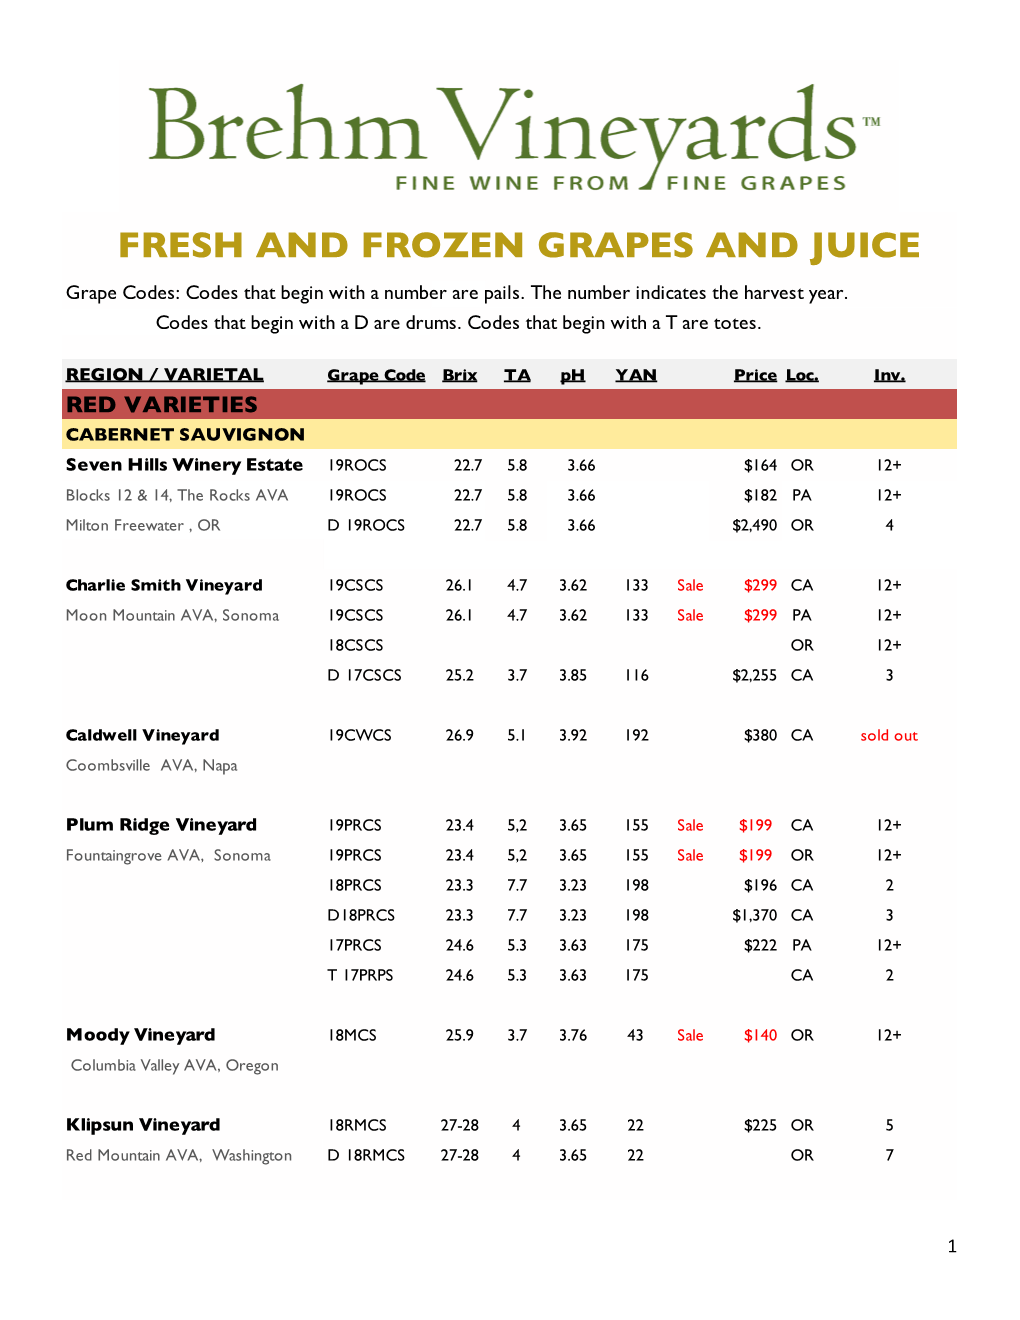 Grapes Inventory and Pricing 3.30.2020